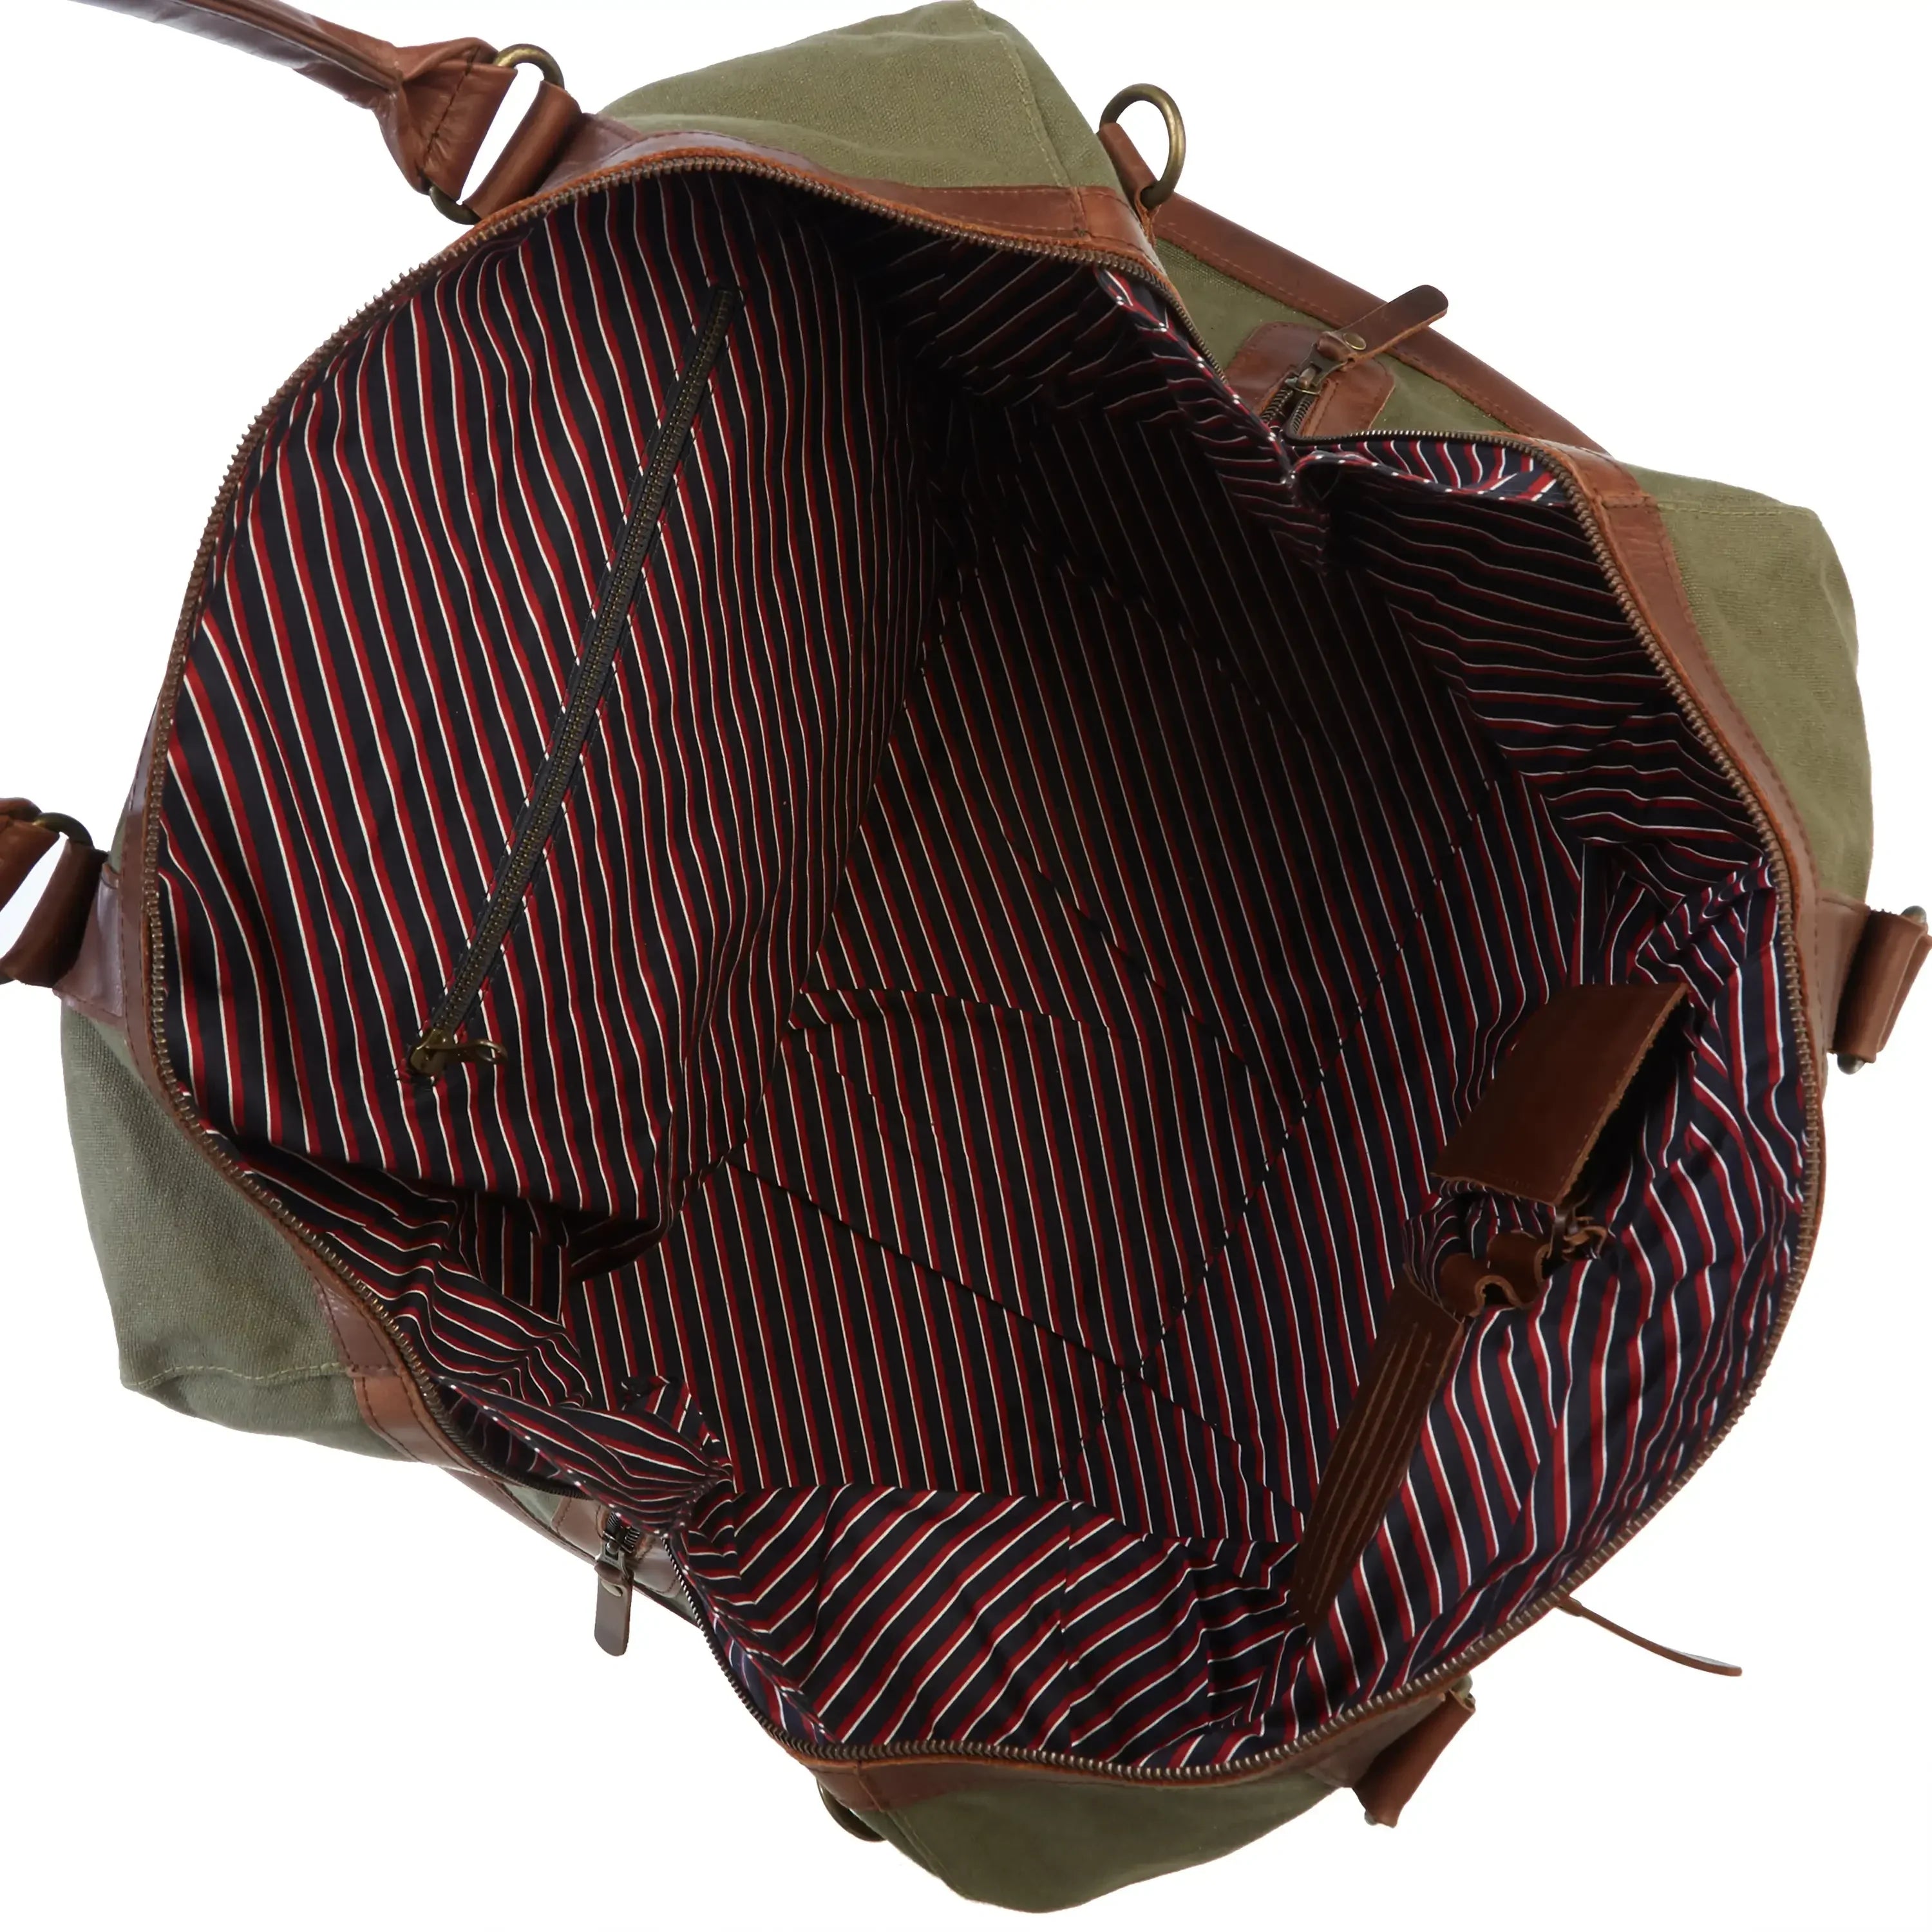 Sac week-end boucle et couture Willow 50 cm - Olive